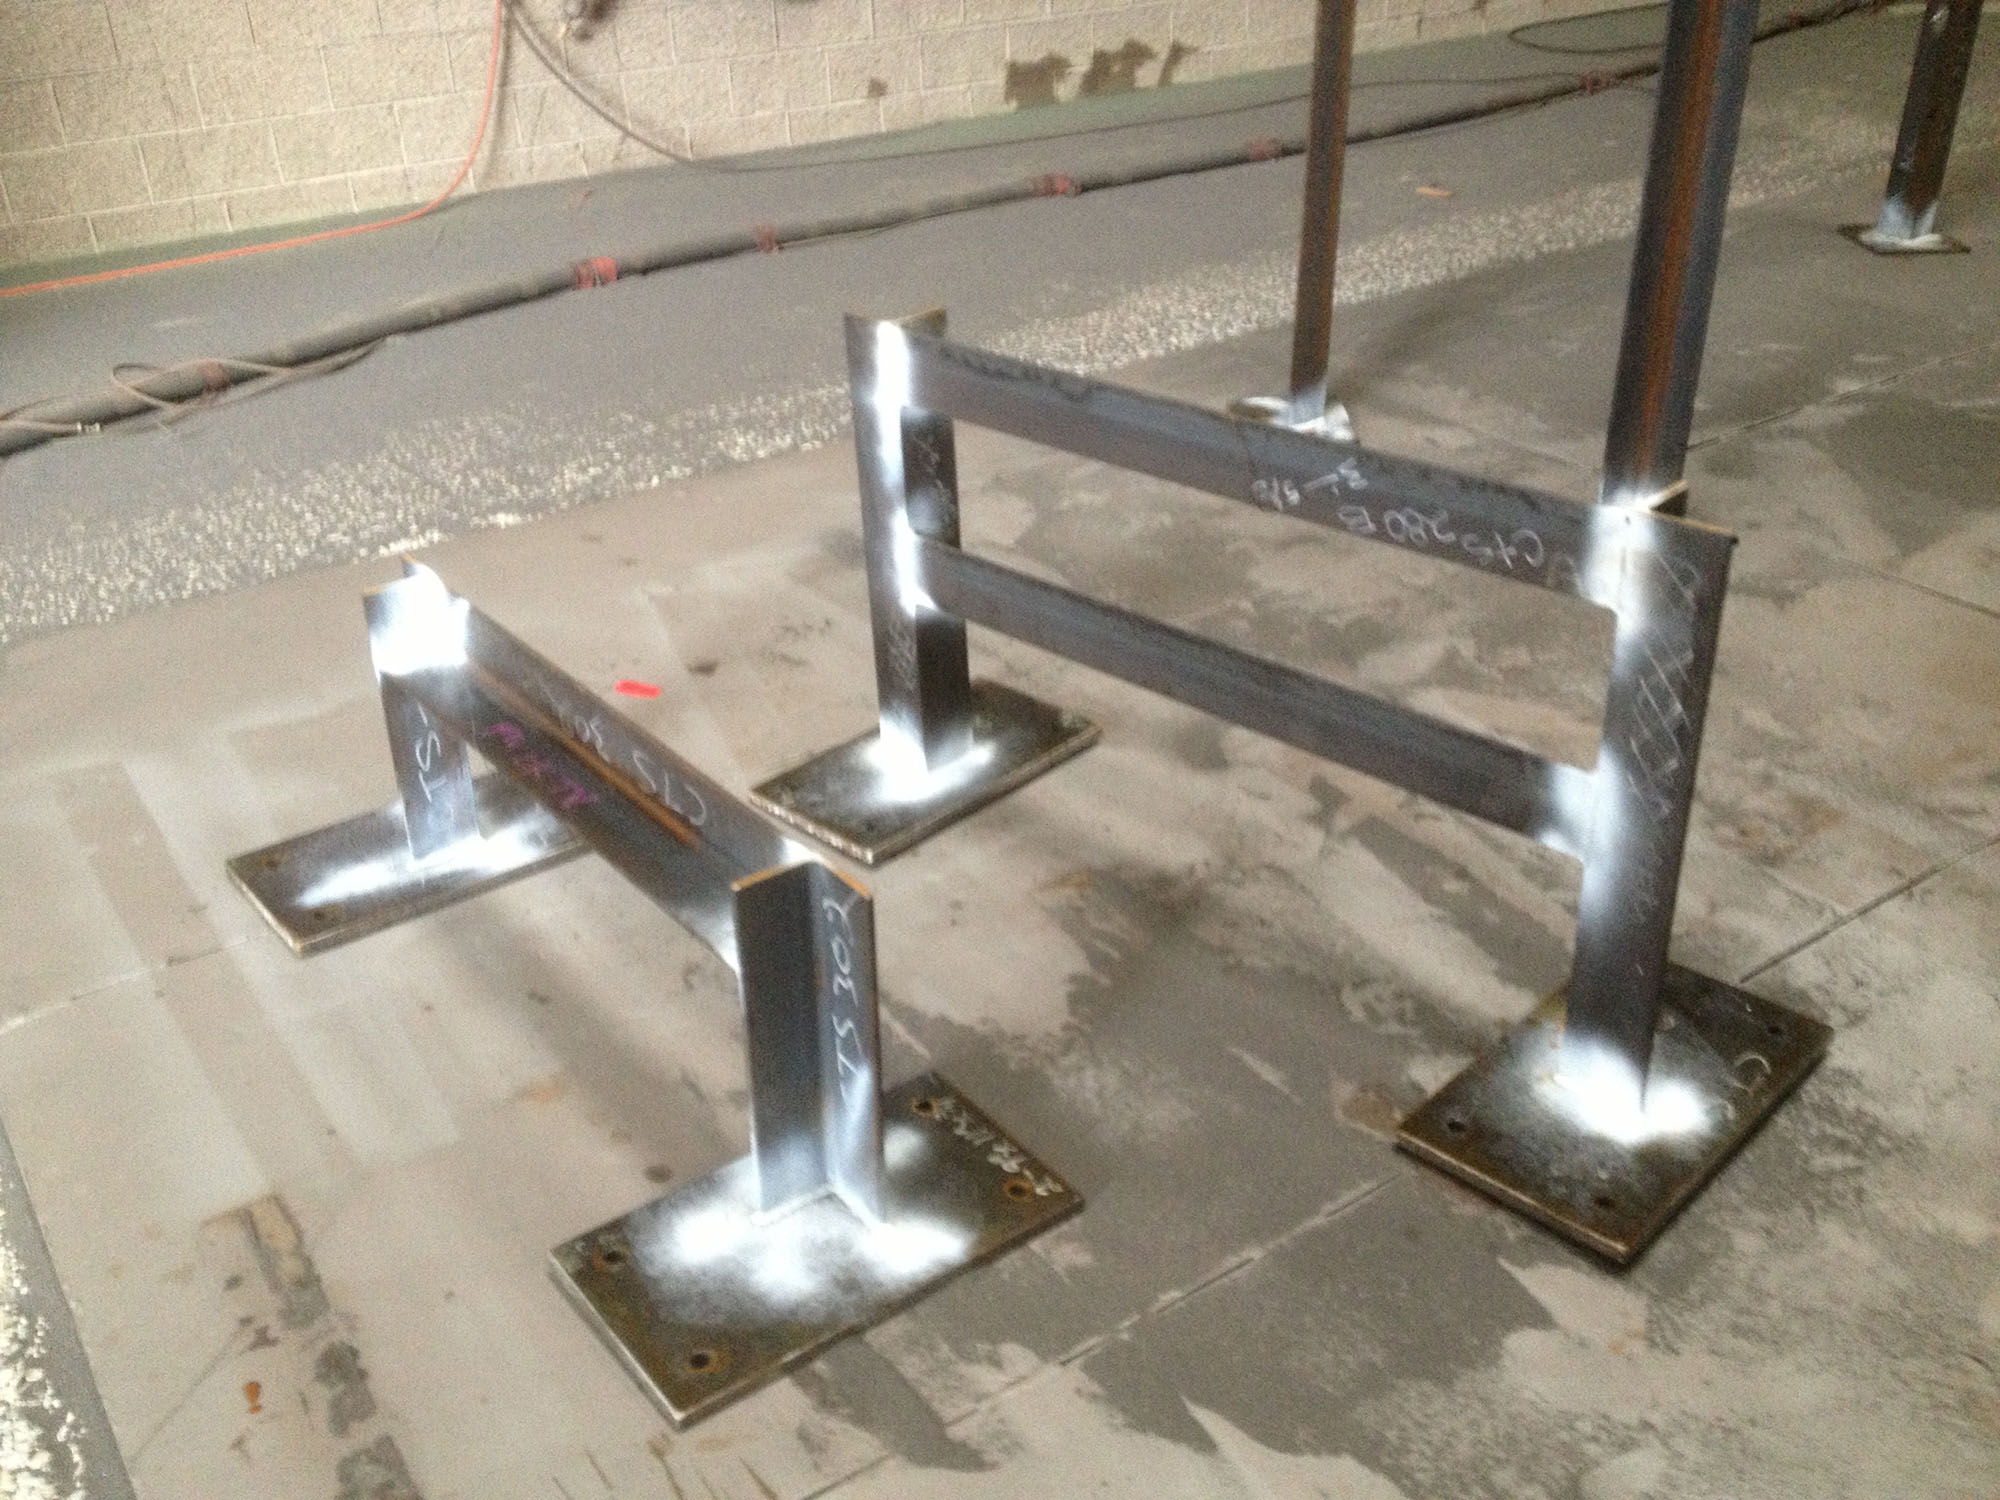 Pentetrant Testing Welds on Supports